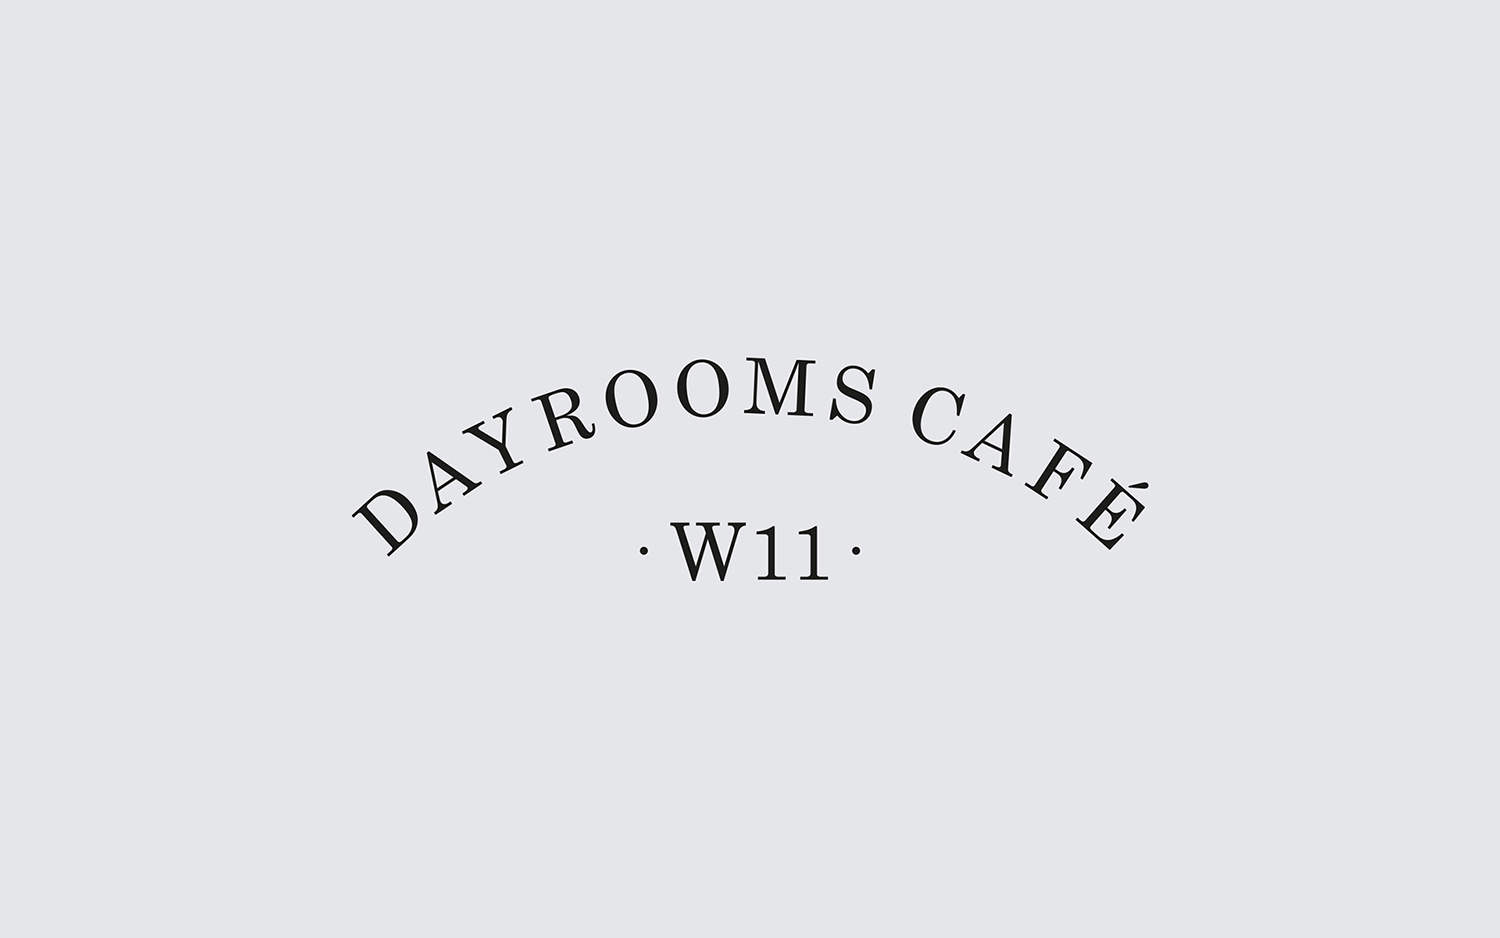 Logotype for The Dayrooms Café designed by Two Times Elliott